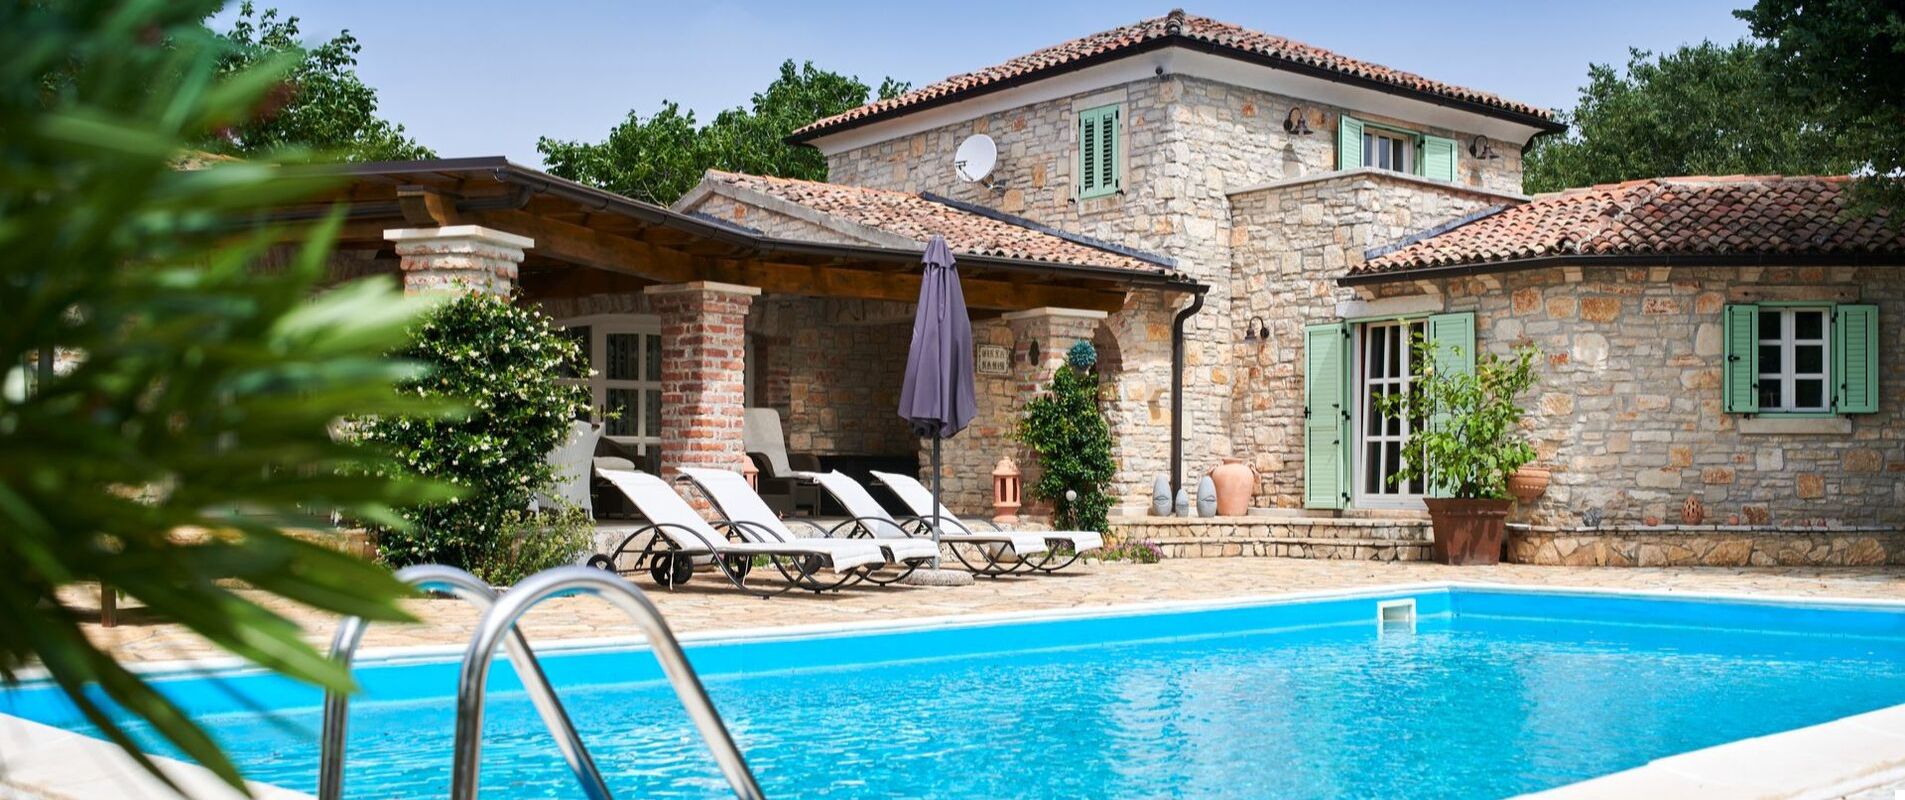 Authentic Villa Karim with a pool and a spacious garden